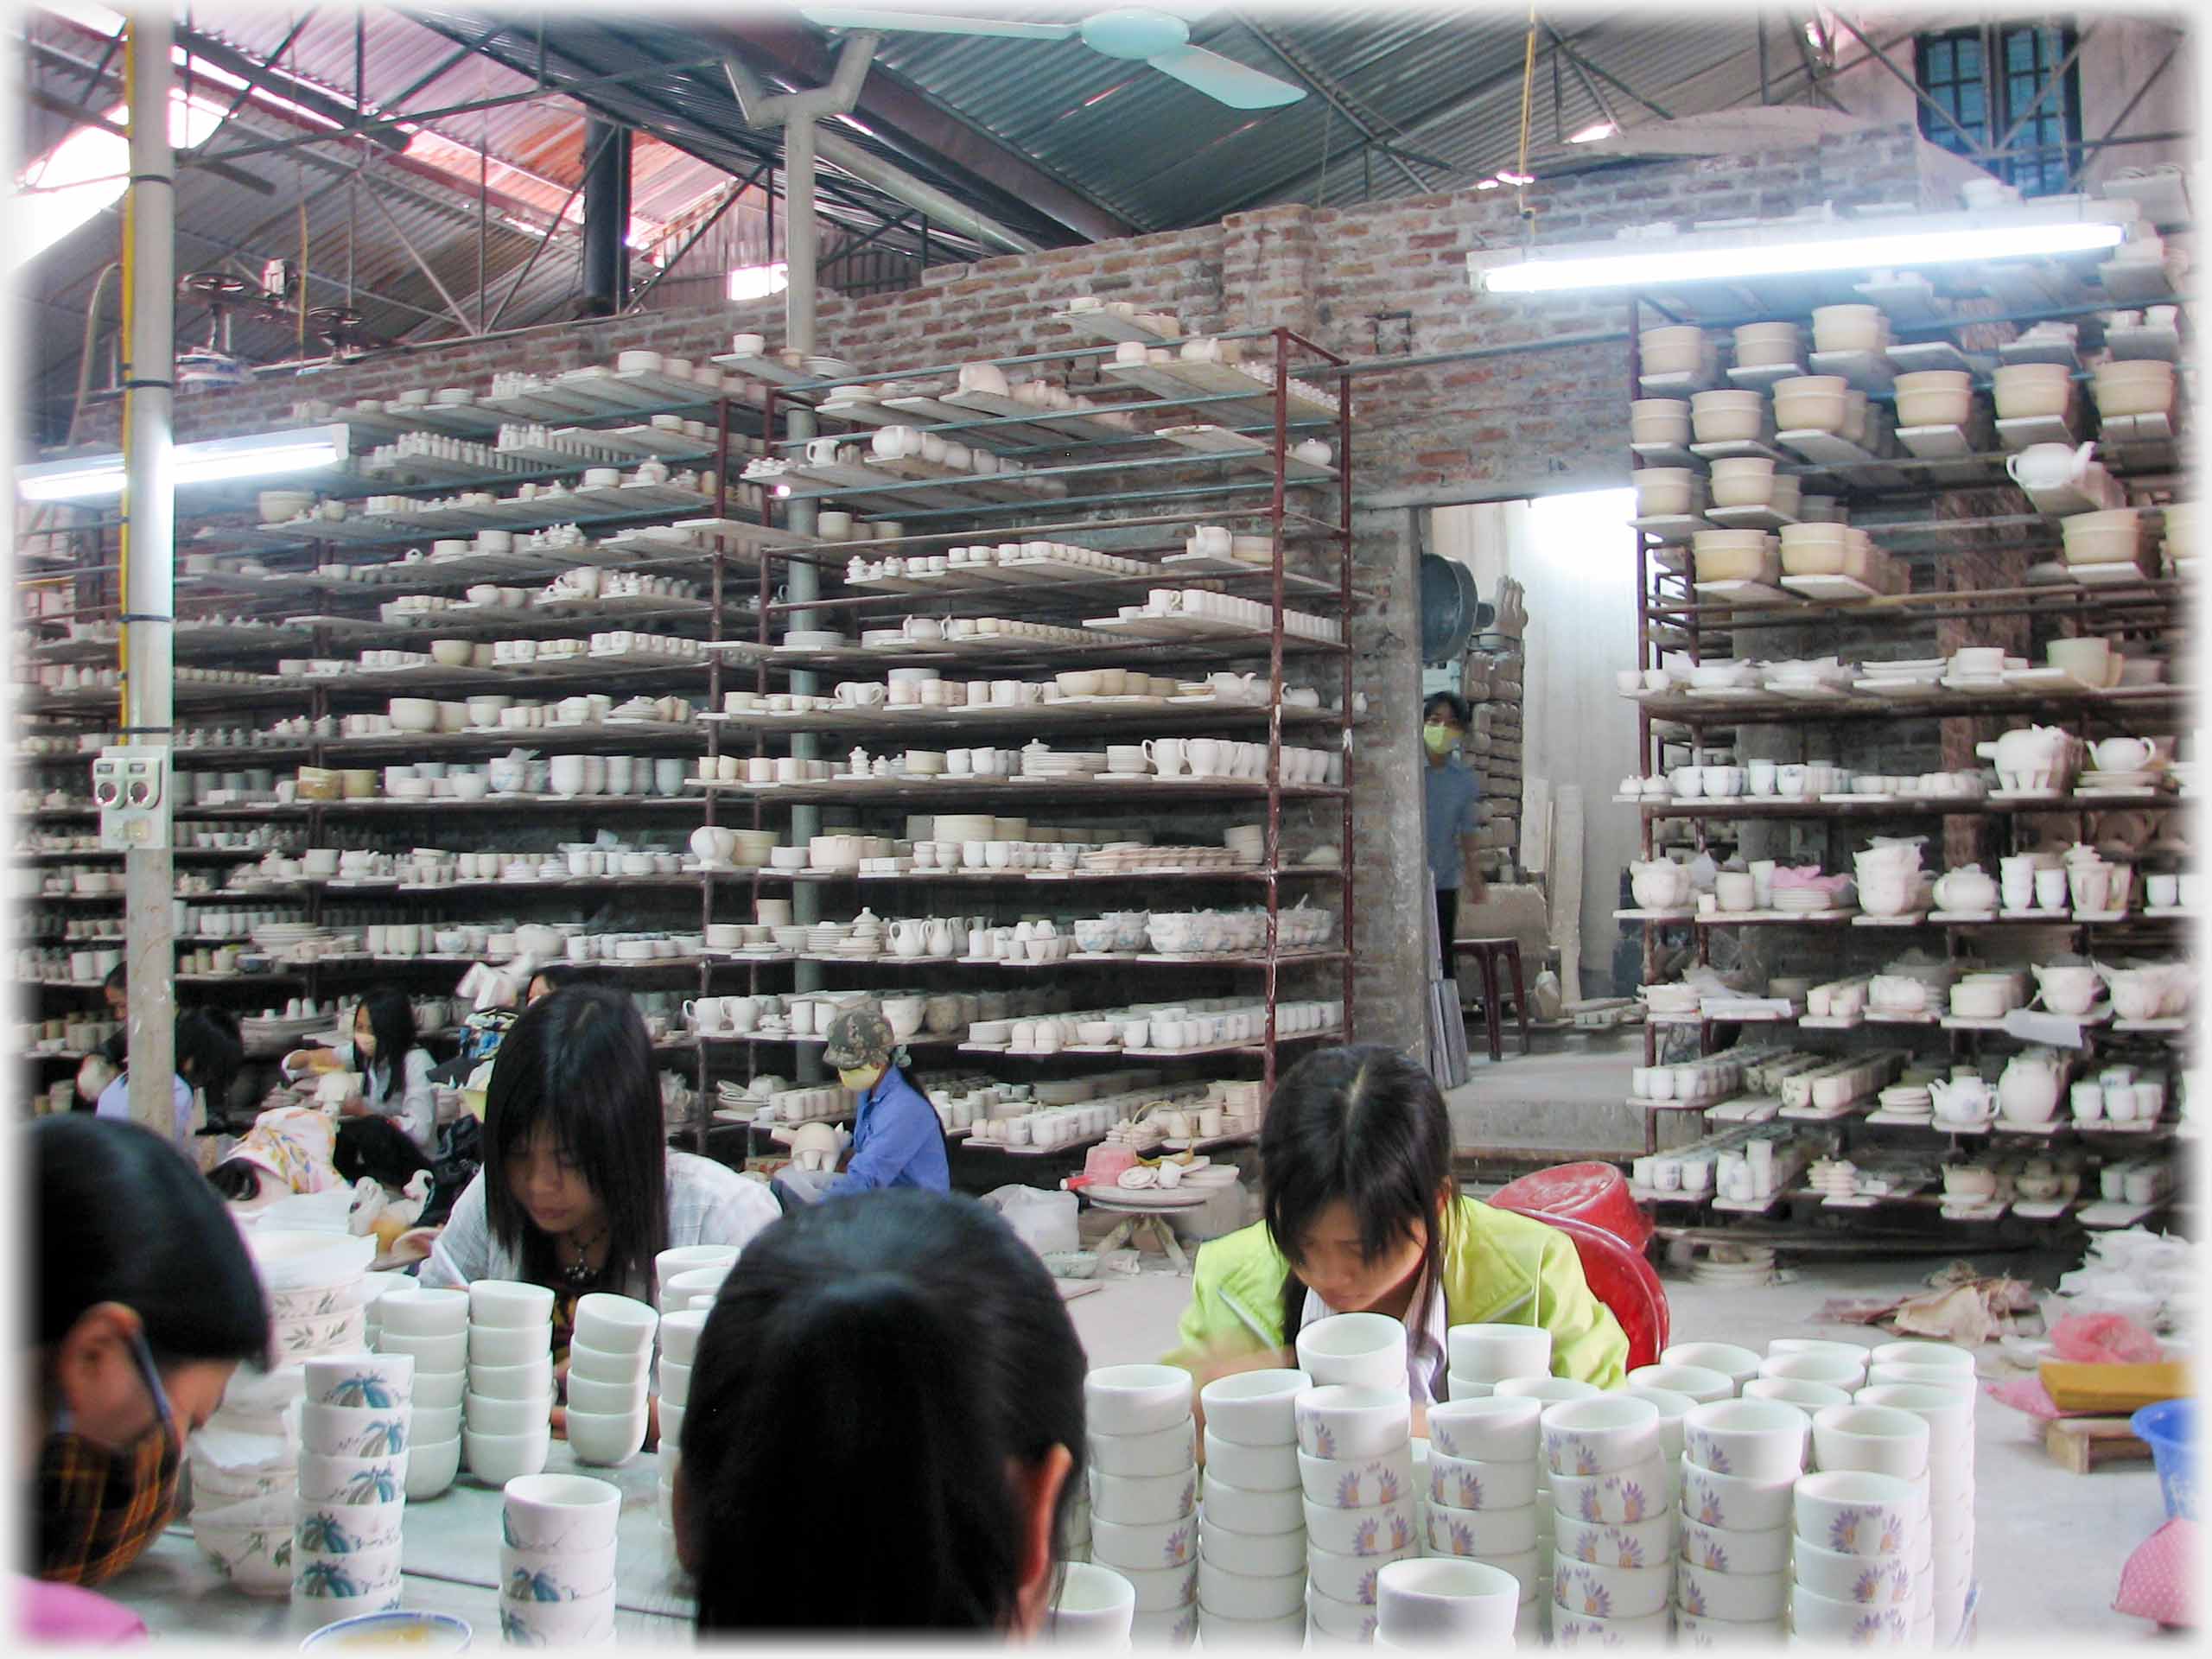 Warehouse with several workers painting pots, and high tiers of shelves behind.